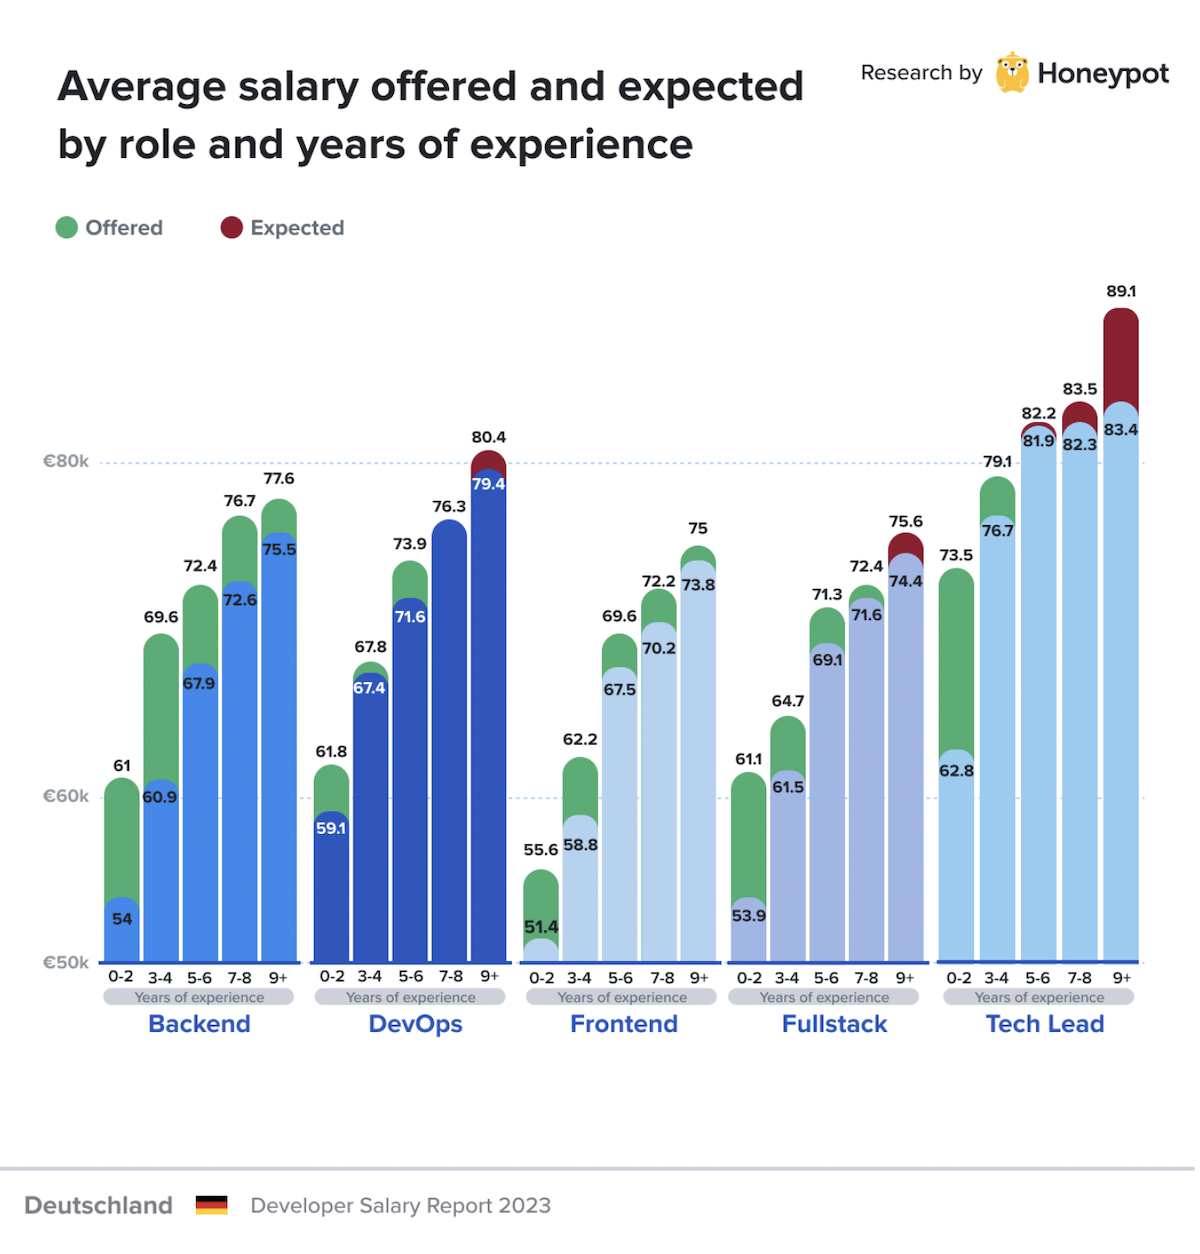 Germany – Average offered and expected salary by role and years of experience